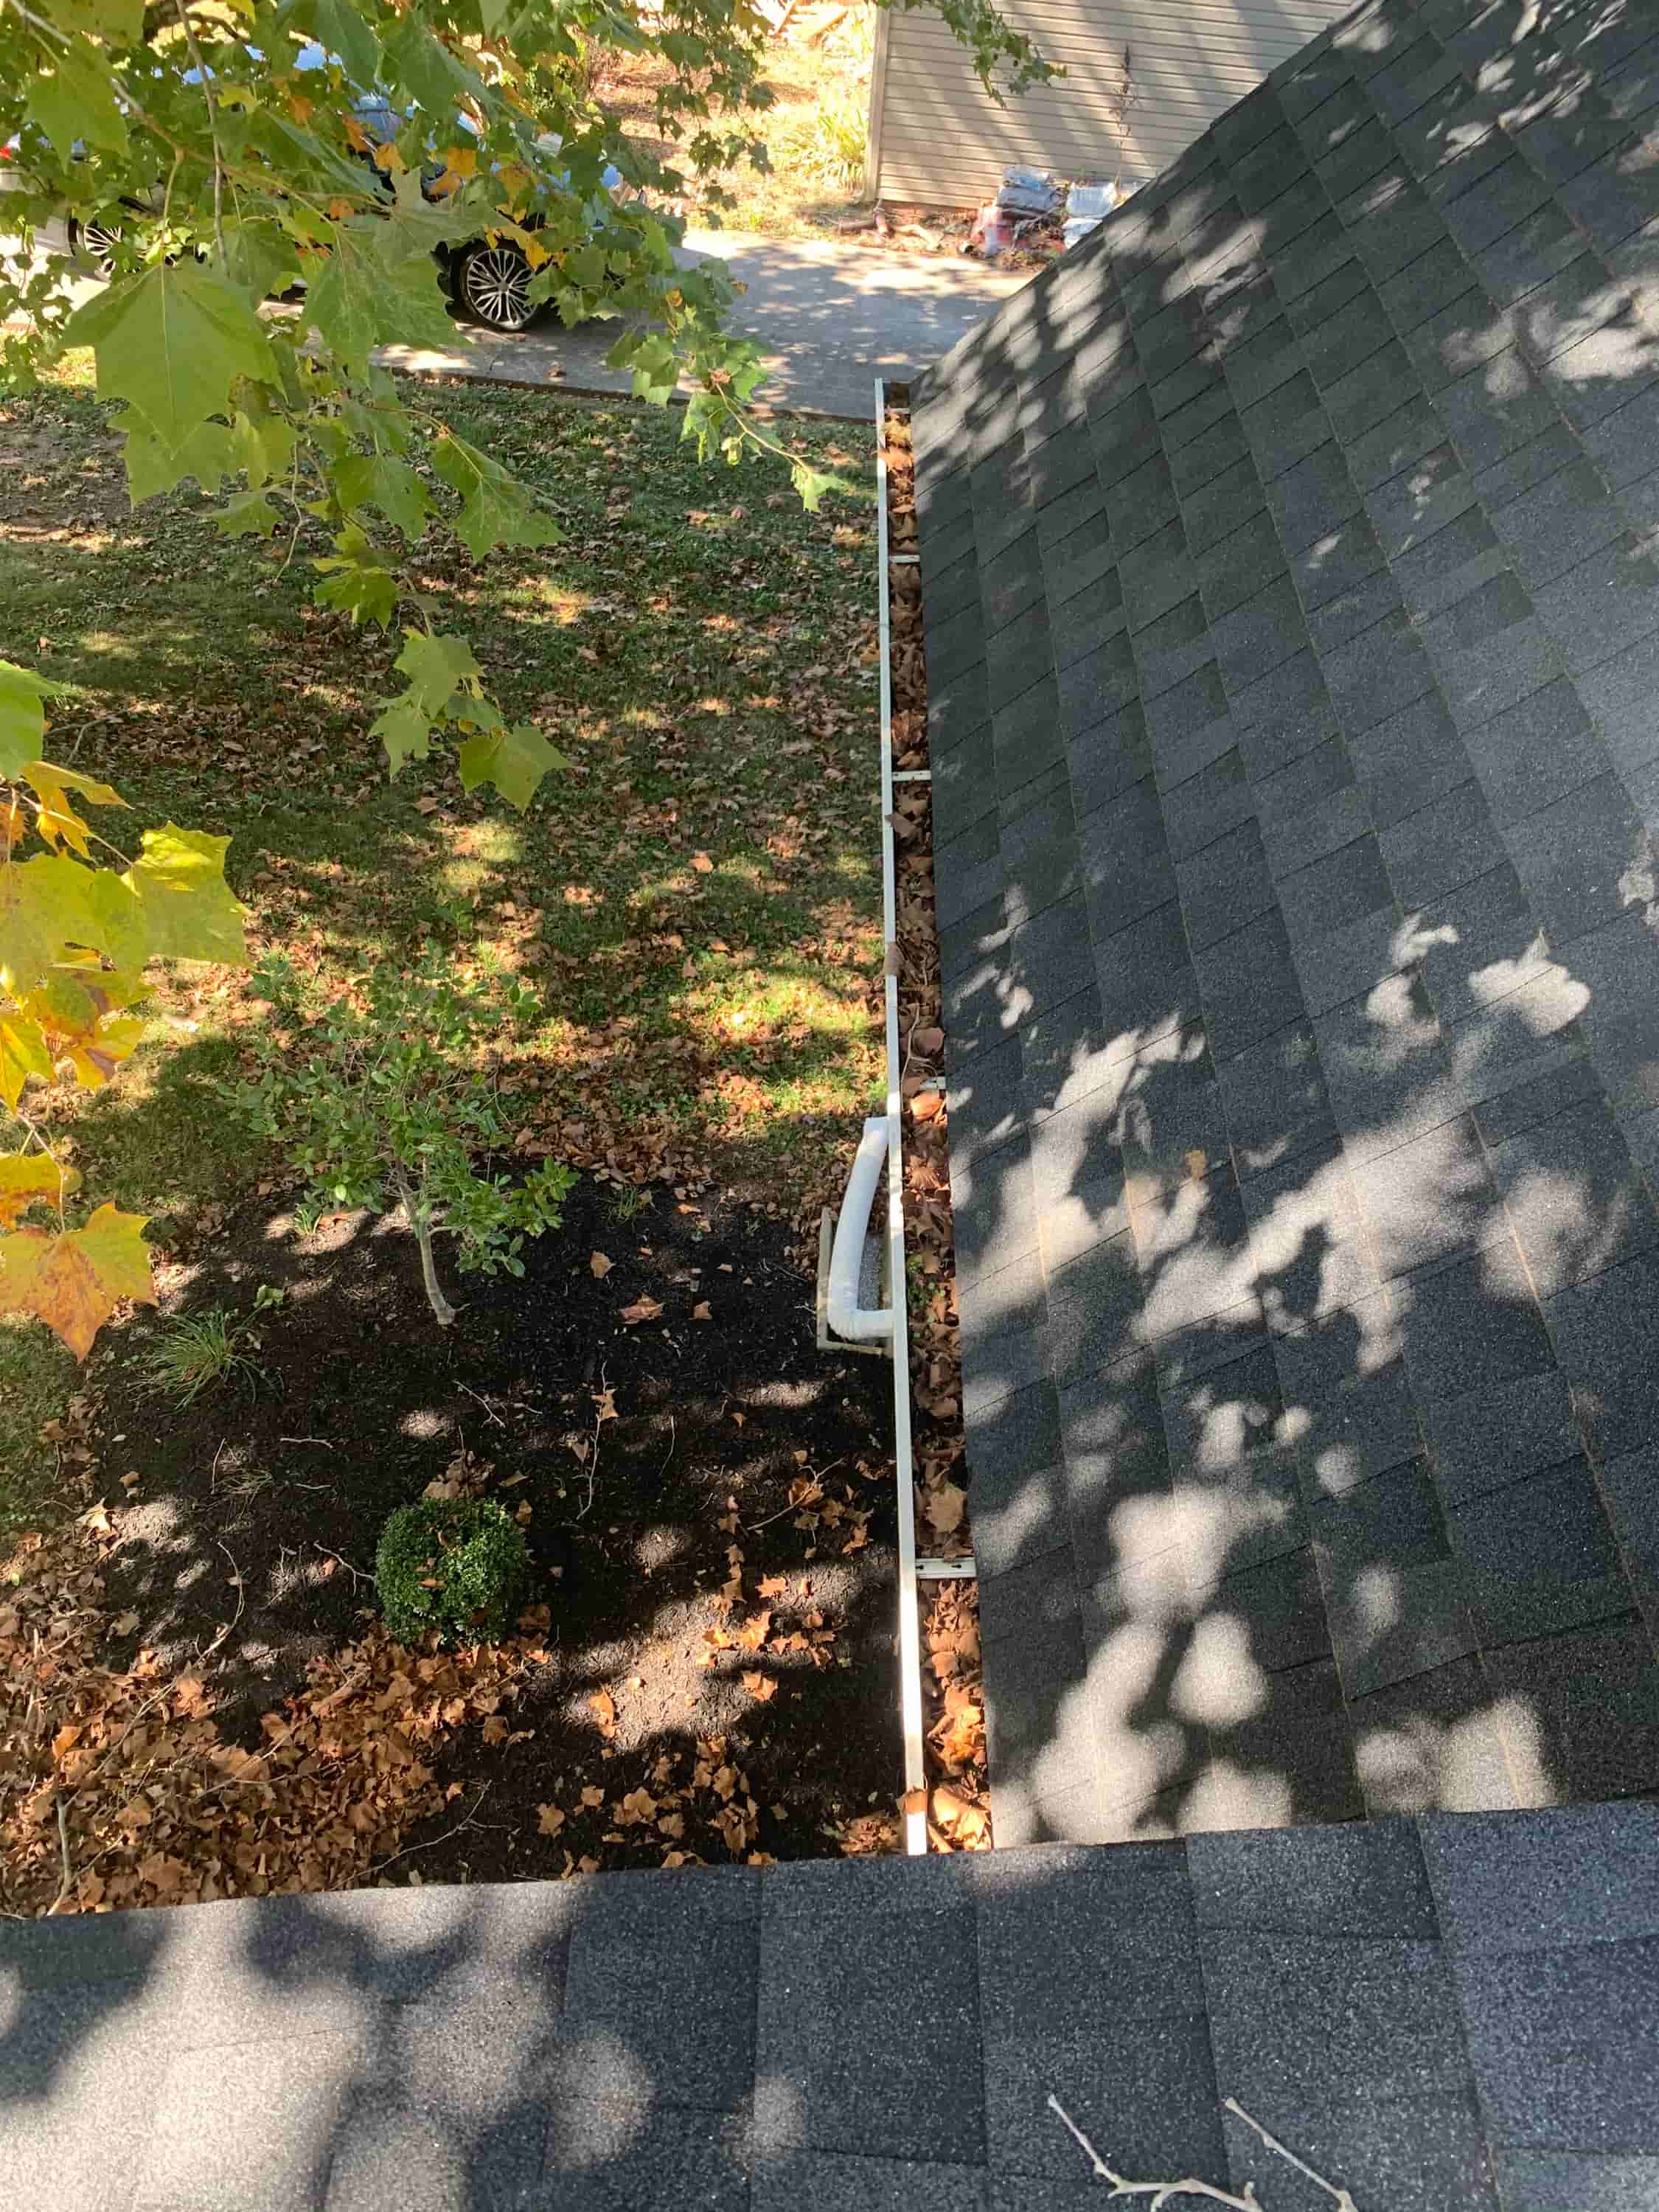 cleaning roof gutters